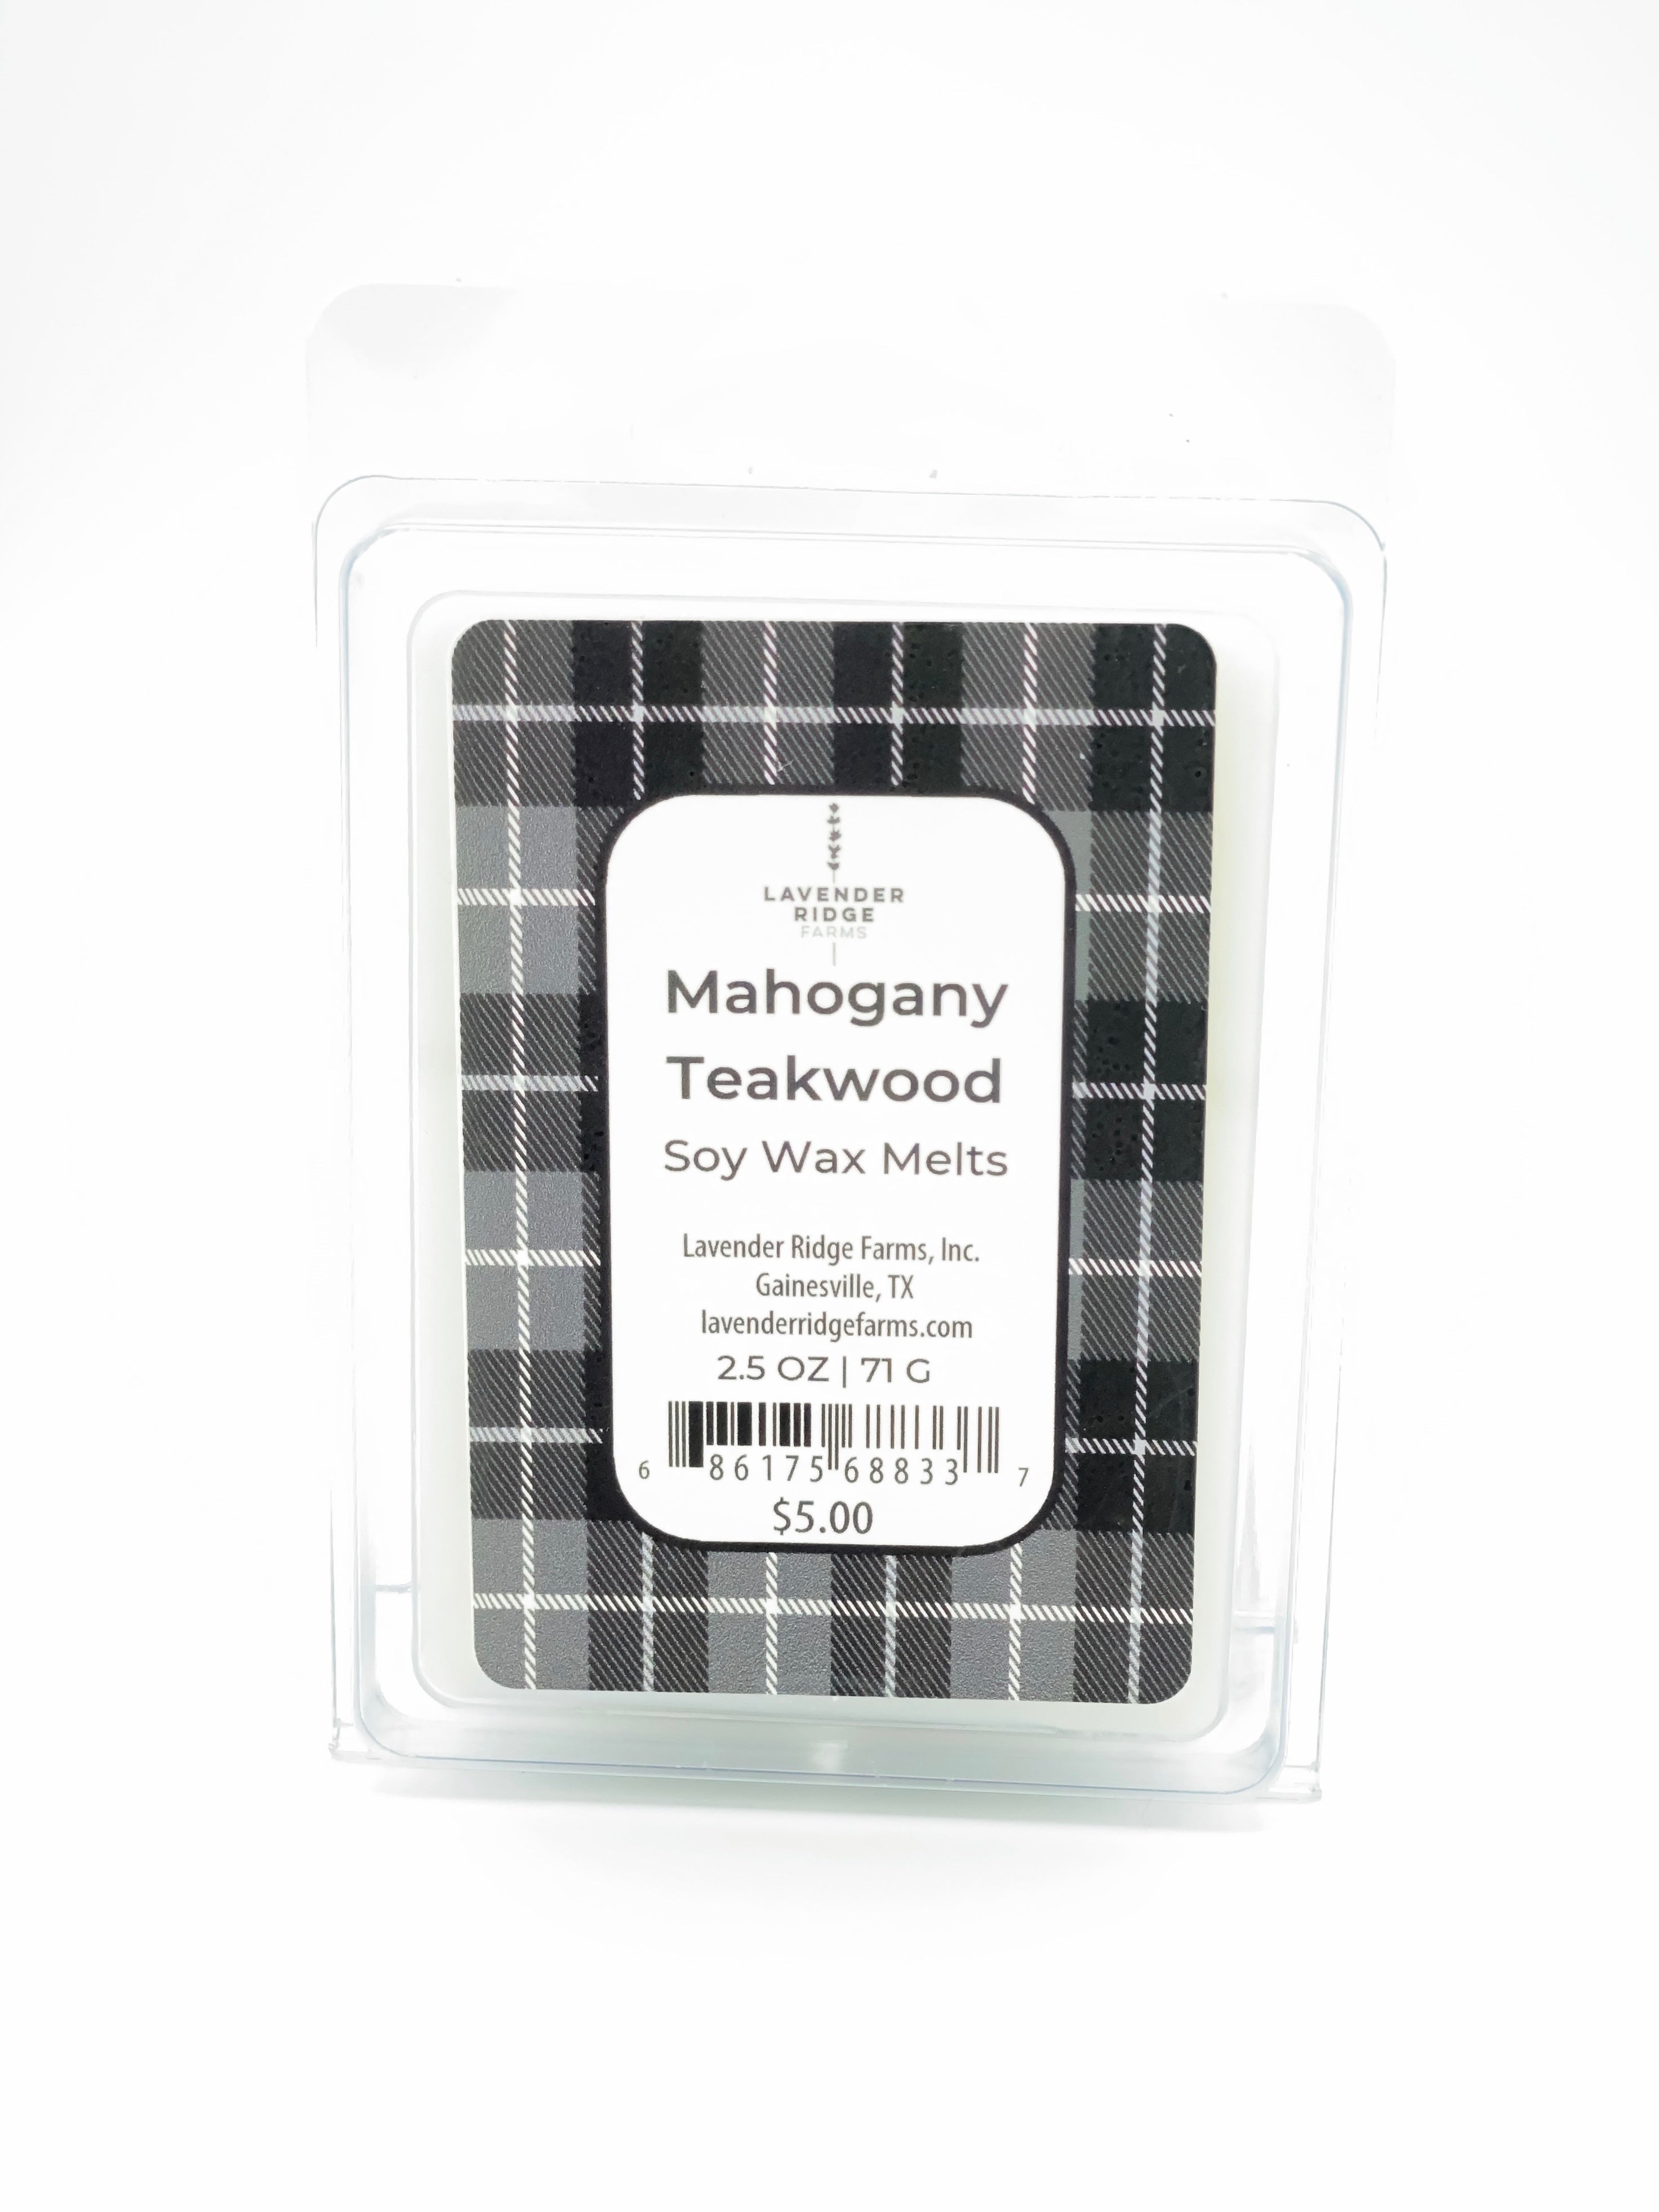 Mahogany Teakwood Wax Melt Manly Wax Melt Manly Scent Earthy Wax Melt  Cologne Scent Gift for Him Gift for Her -  Canada